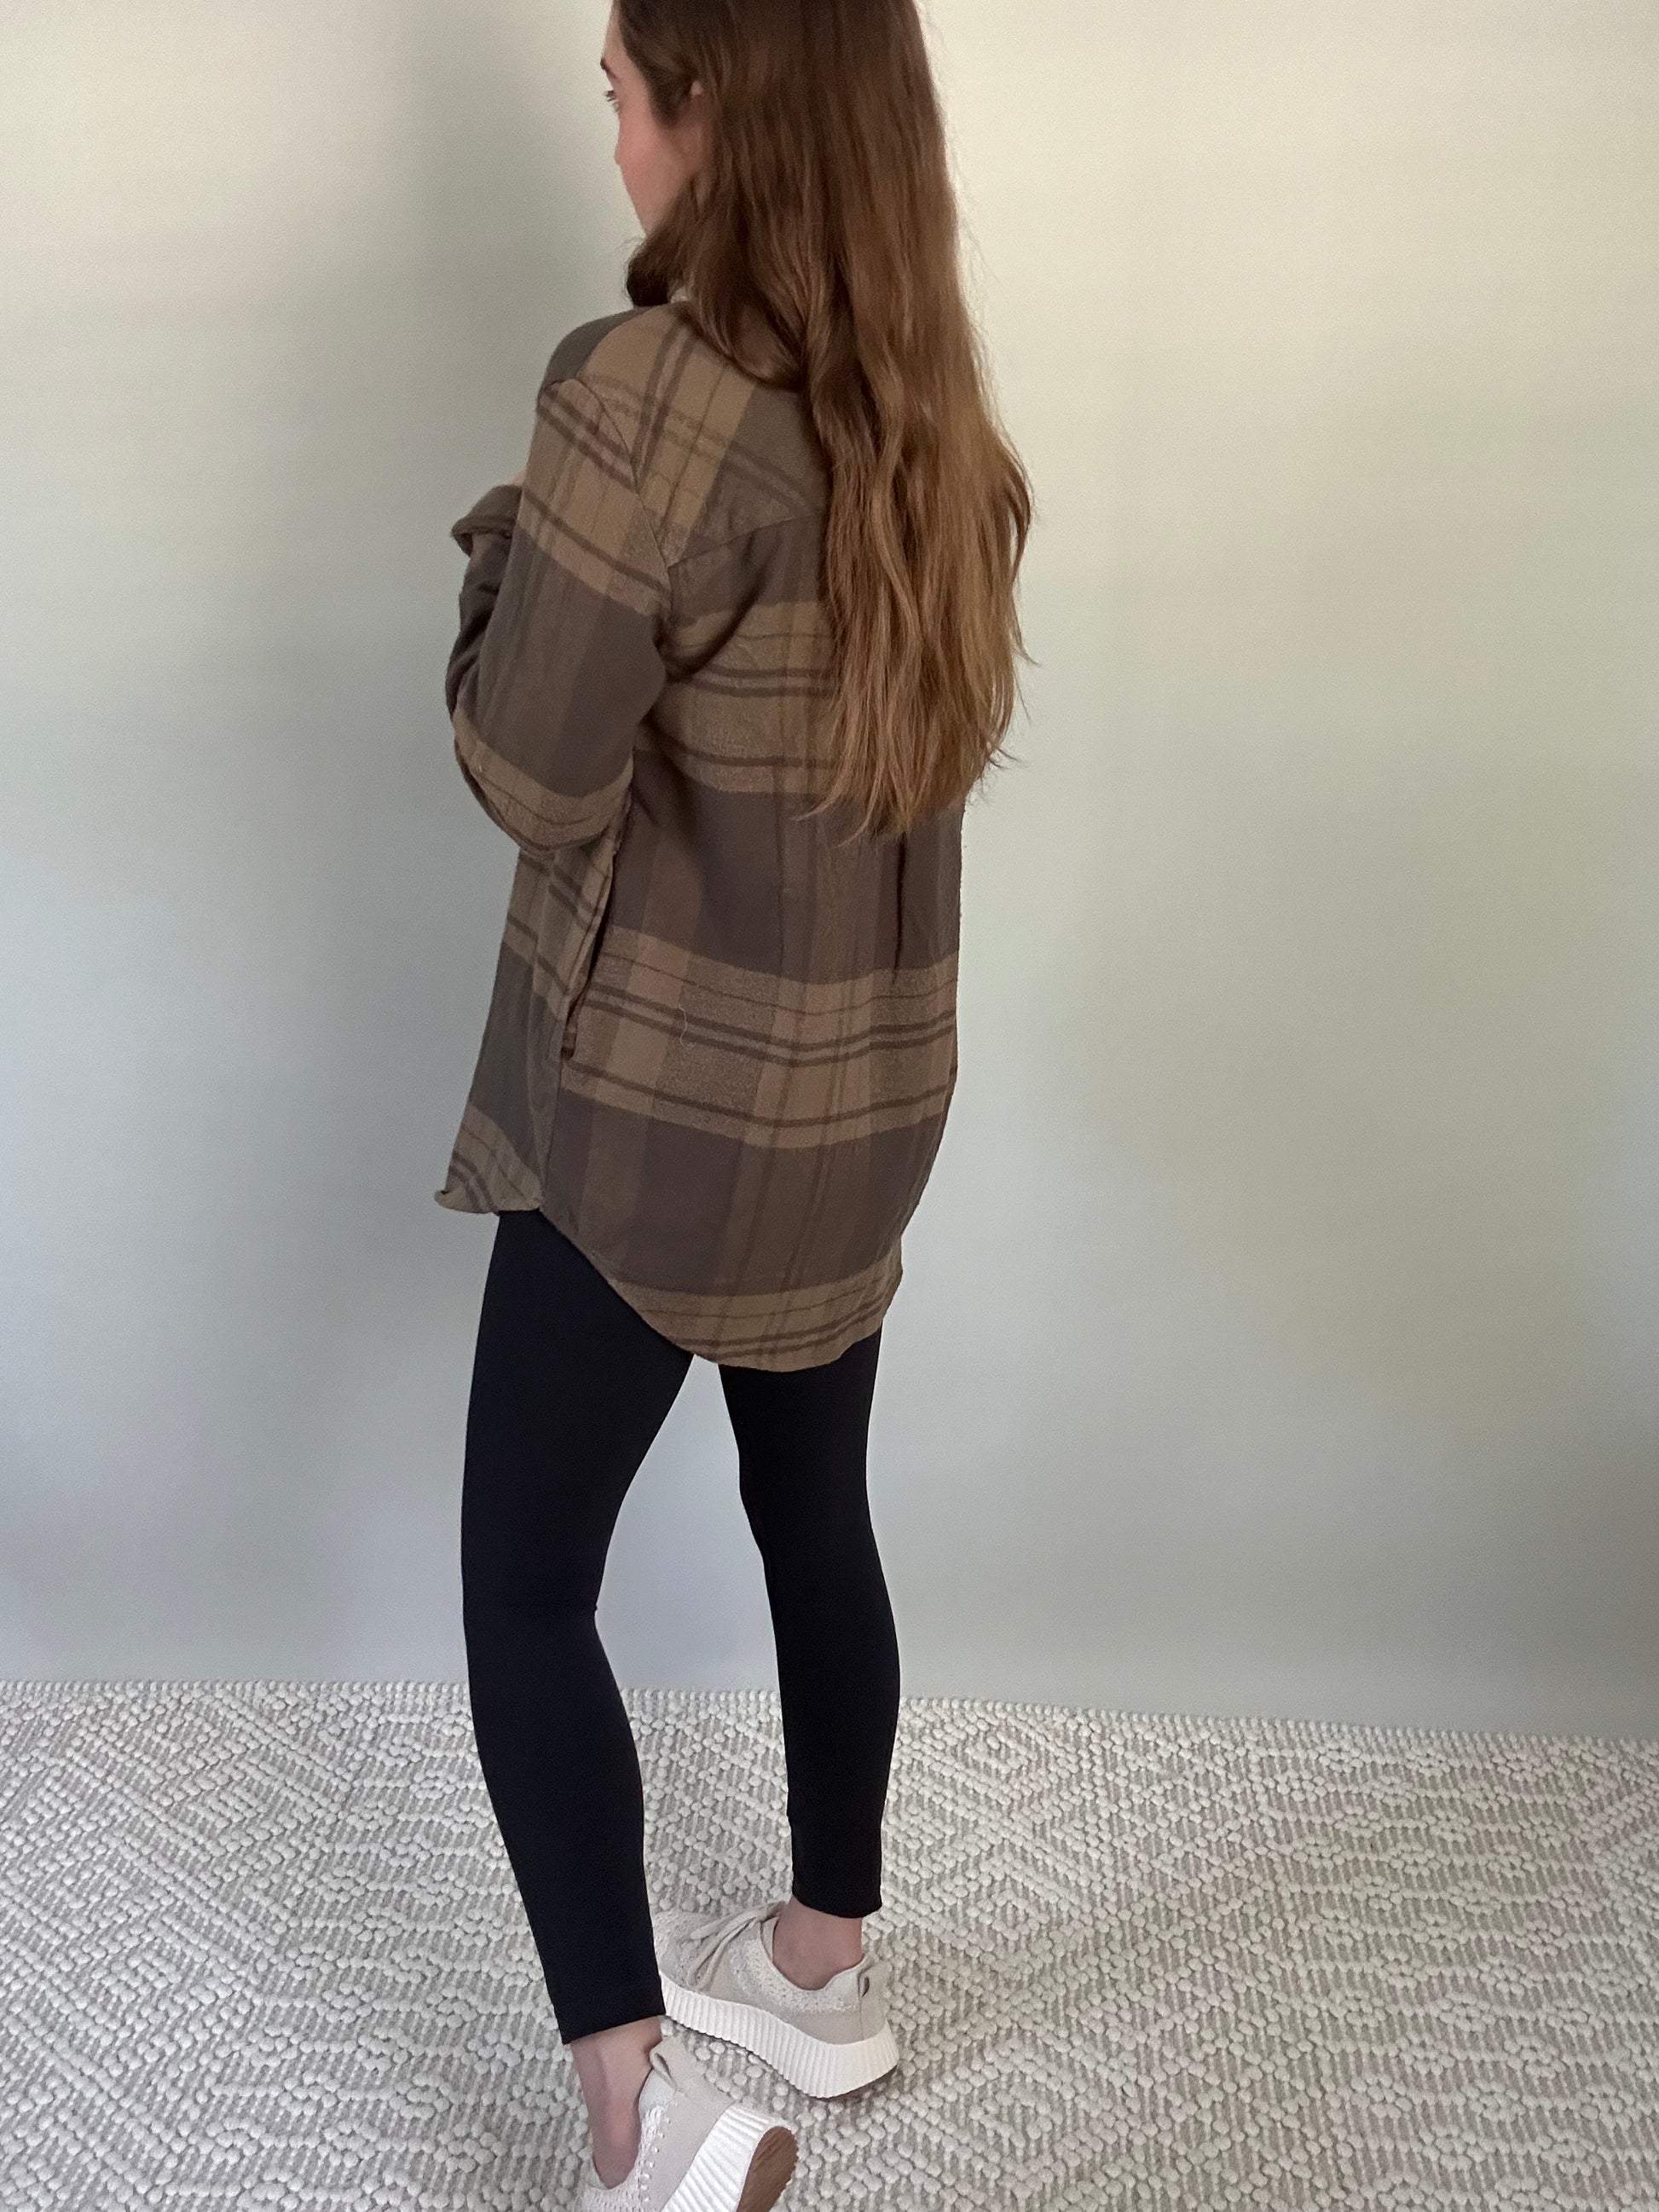 Mossy Oaks Flannel with side pockets